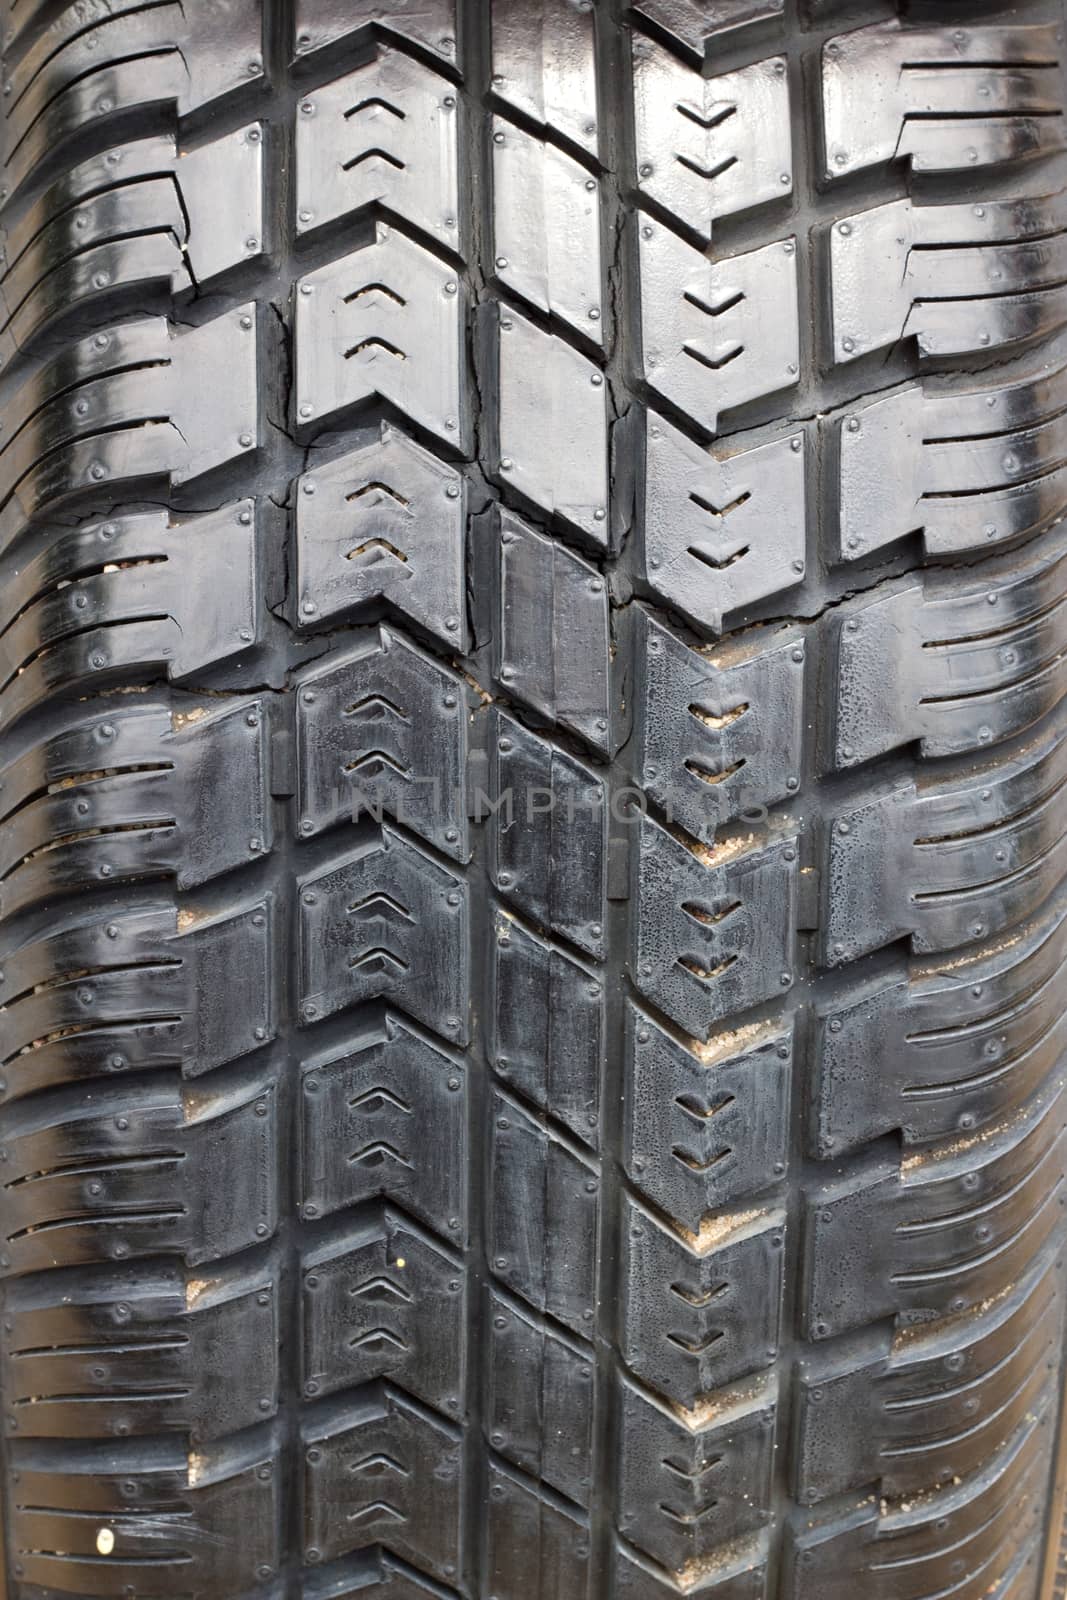 Tread patterns on old worn car tires by ZONETEEn